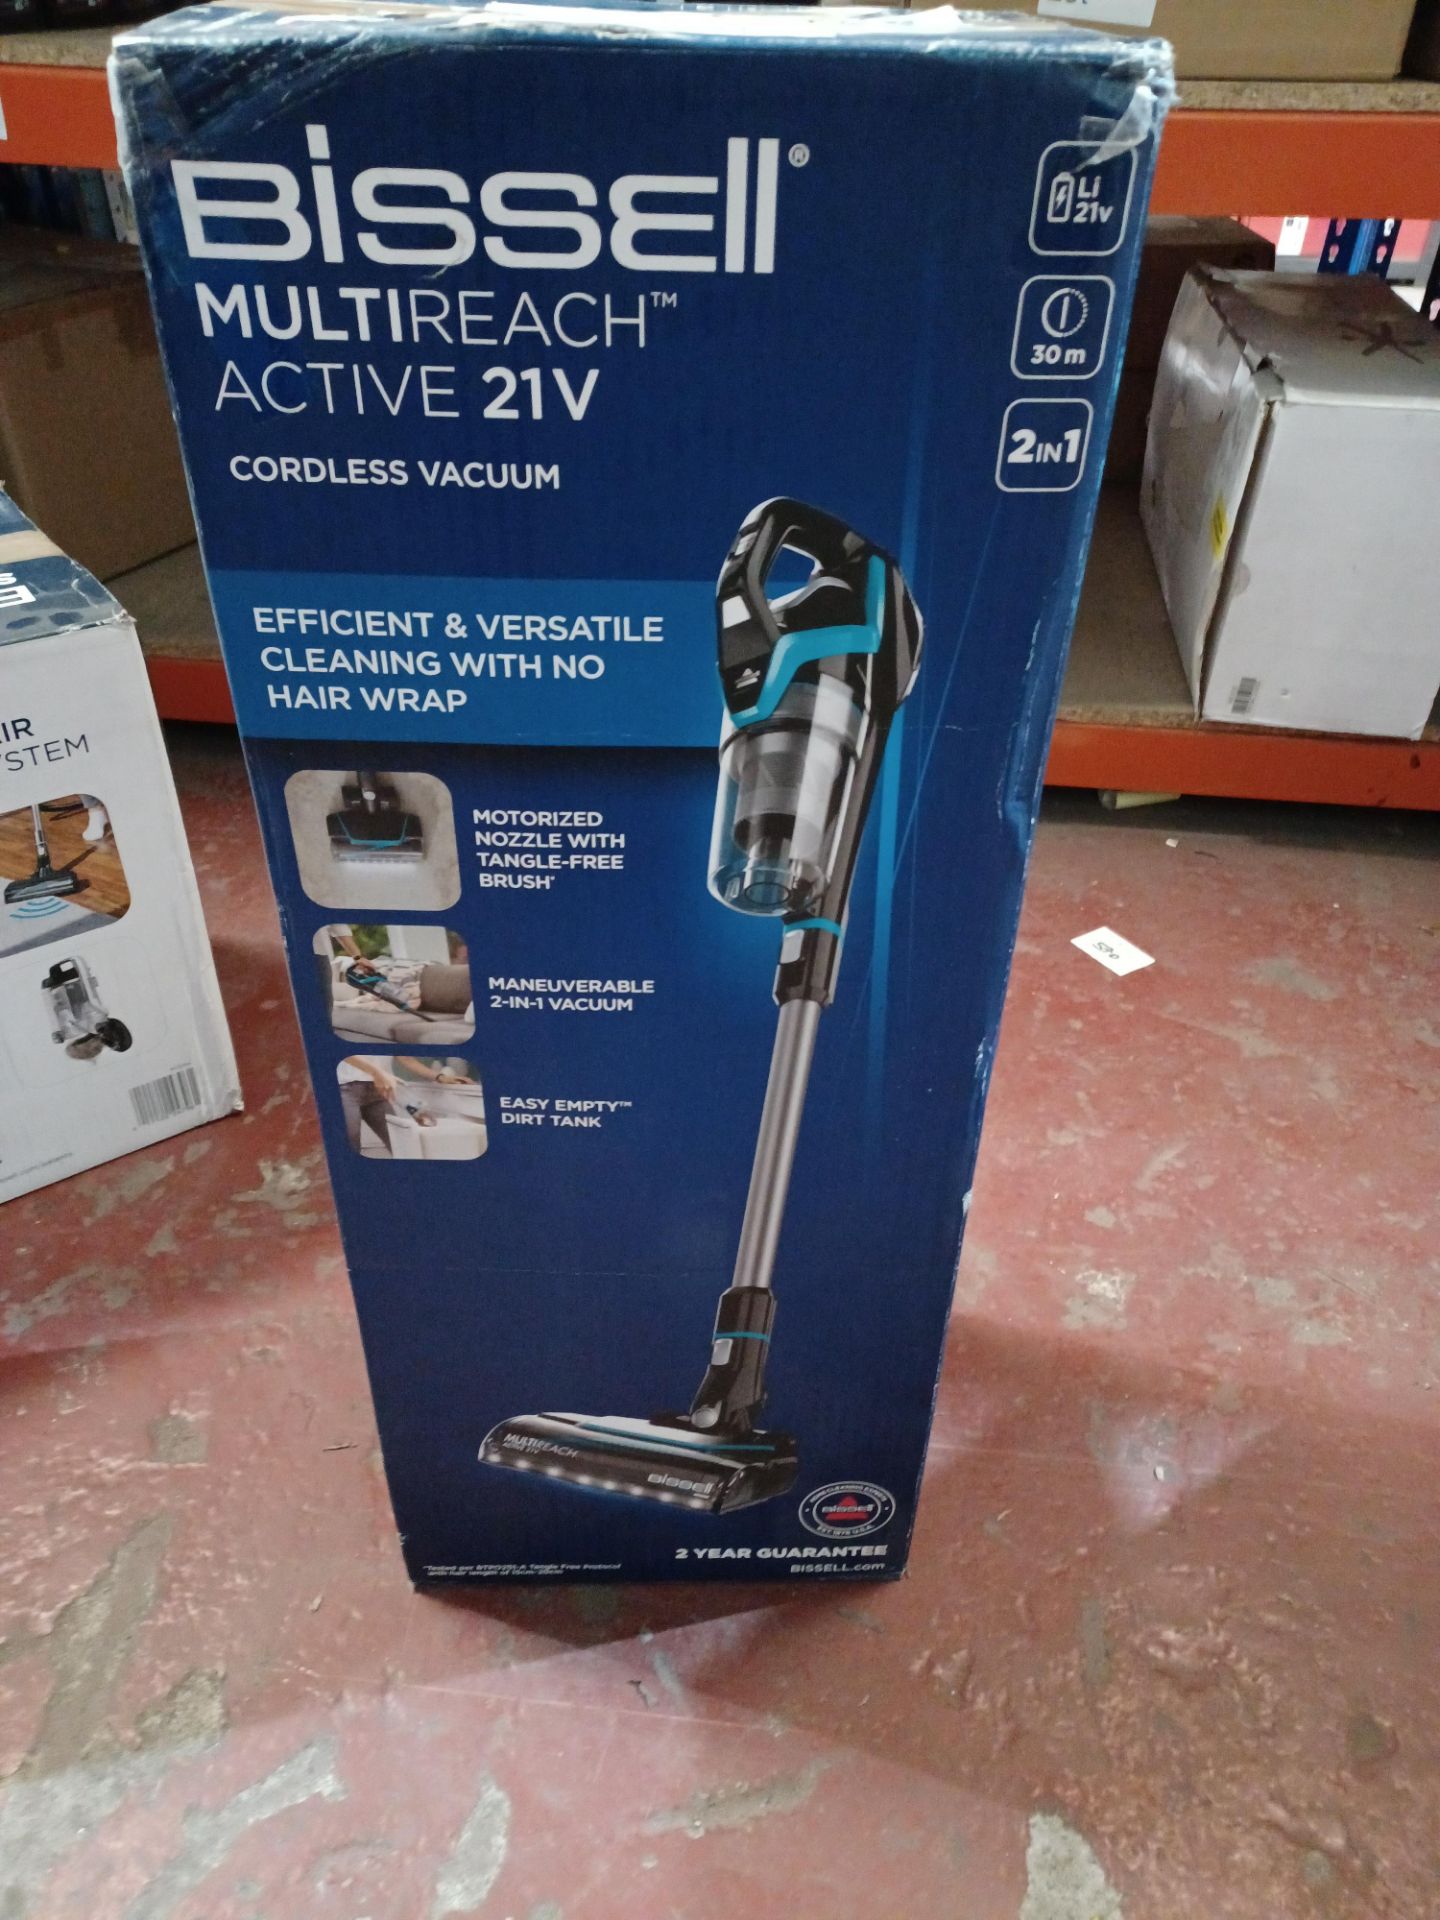 BISSELL MULTIREACH ACTIVE 21V CORDLESS VACUUM RRP £319 UNCHECKED - PCK